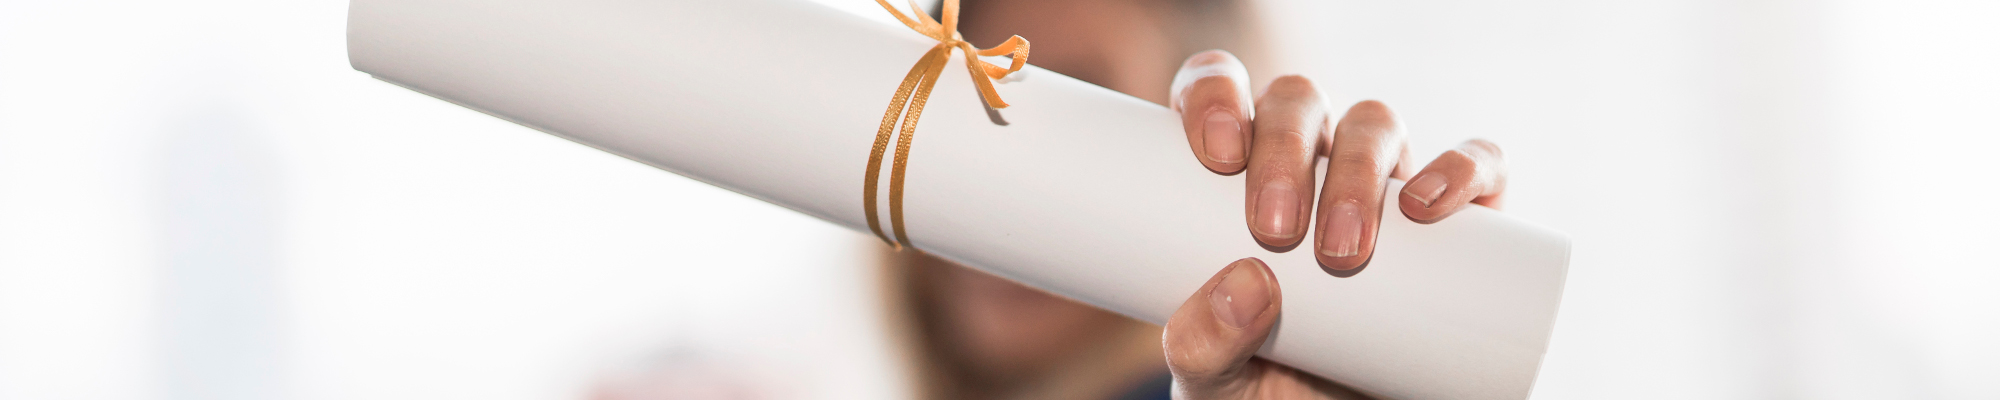 Image of someone holding a diploma with a tie